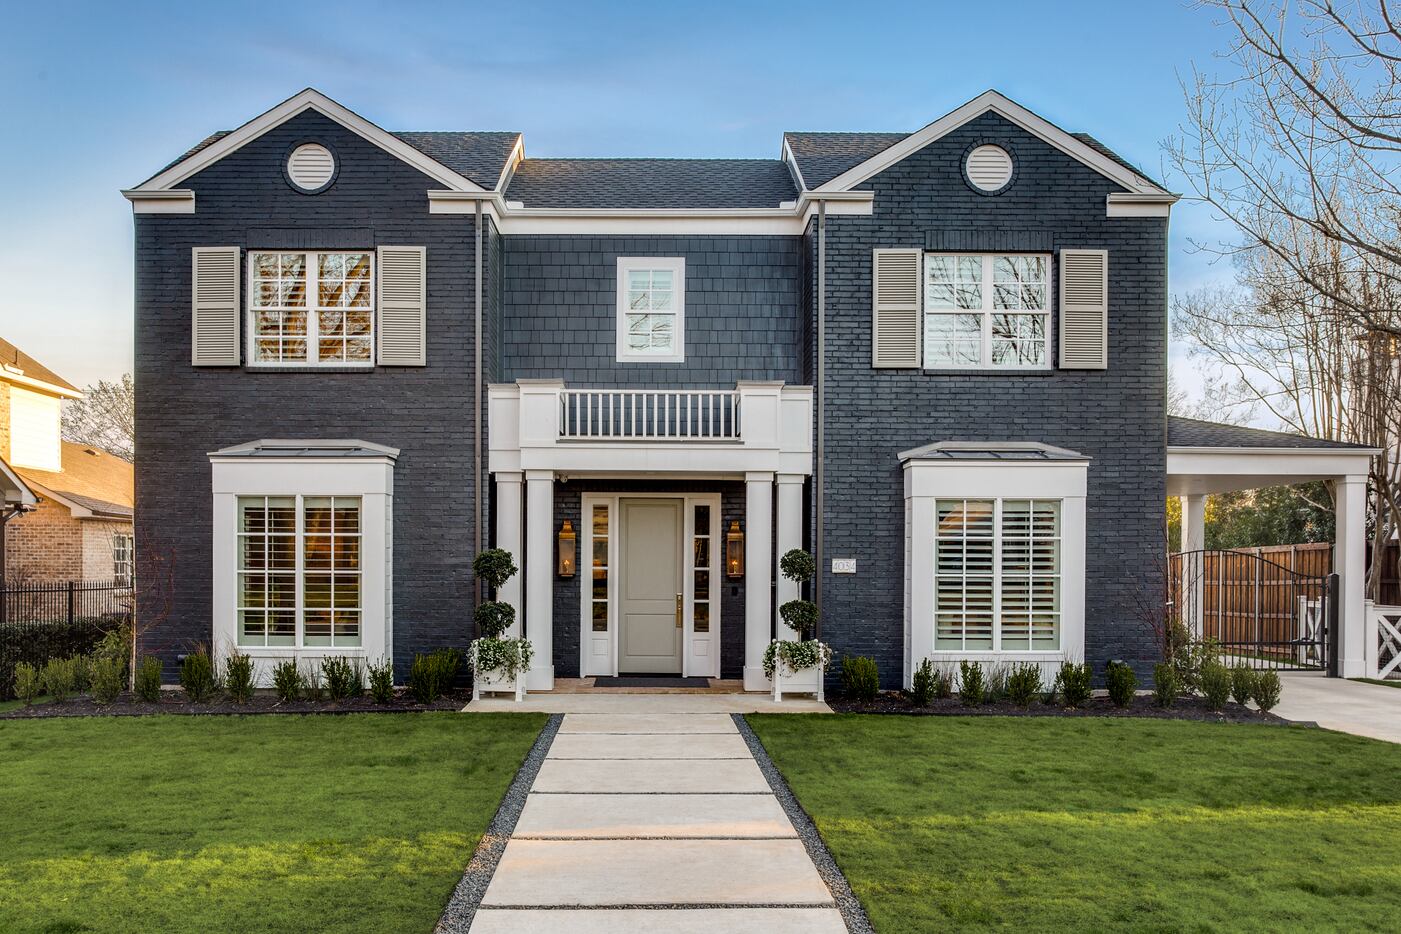 The buyer of Thomas Development + Construction's house wanted a New England look.